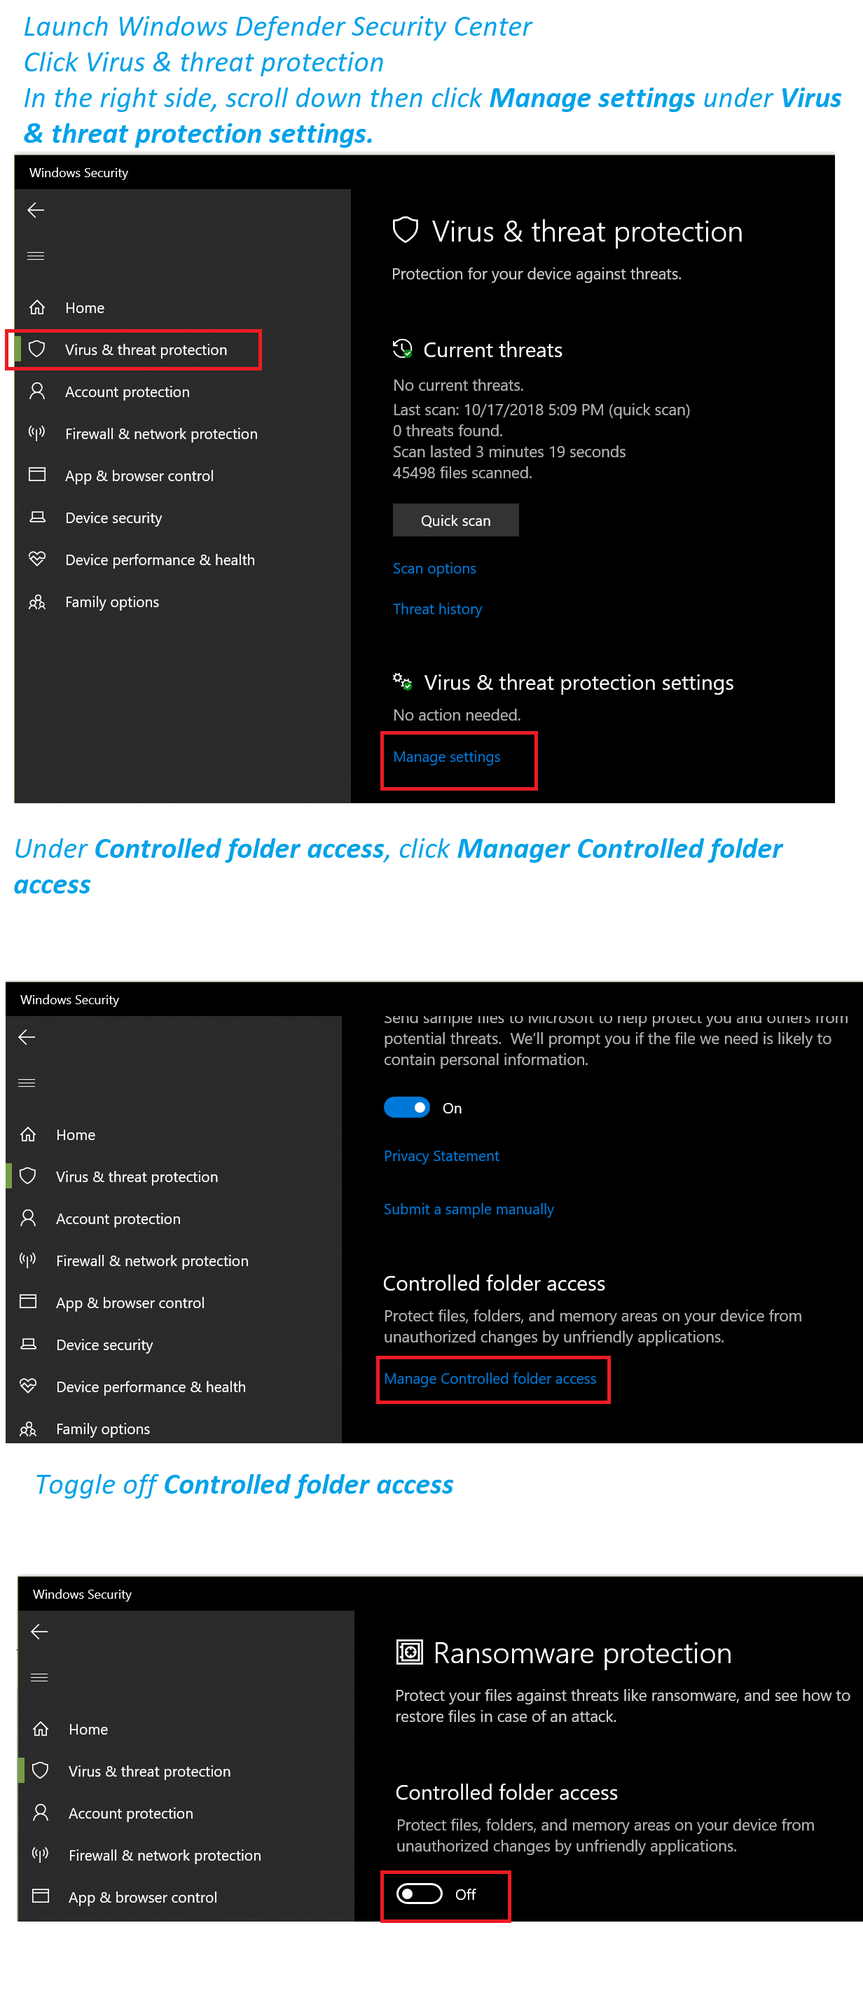 Easy Guide: How to Manage Controlled Folder Access in Windows Defender Security Center b8073bc3-f767-4d30-b460-e952417fe446?upload=true.png